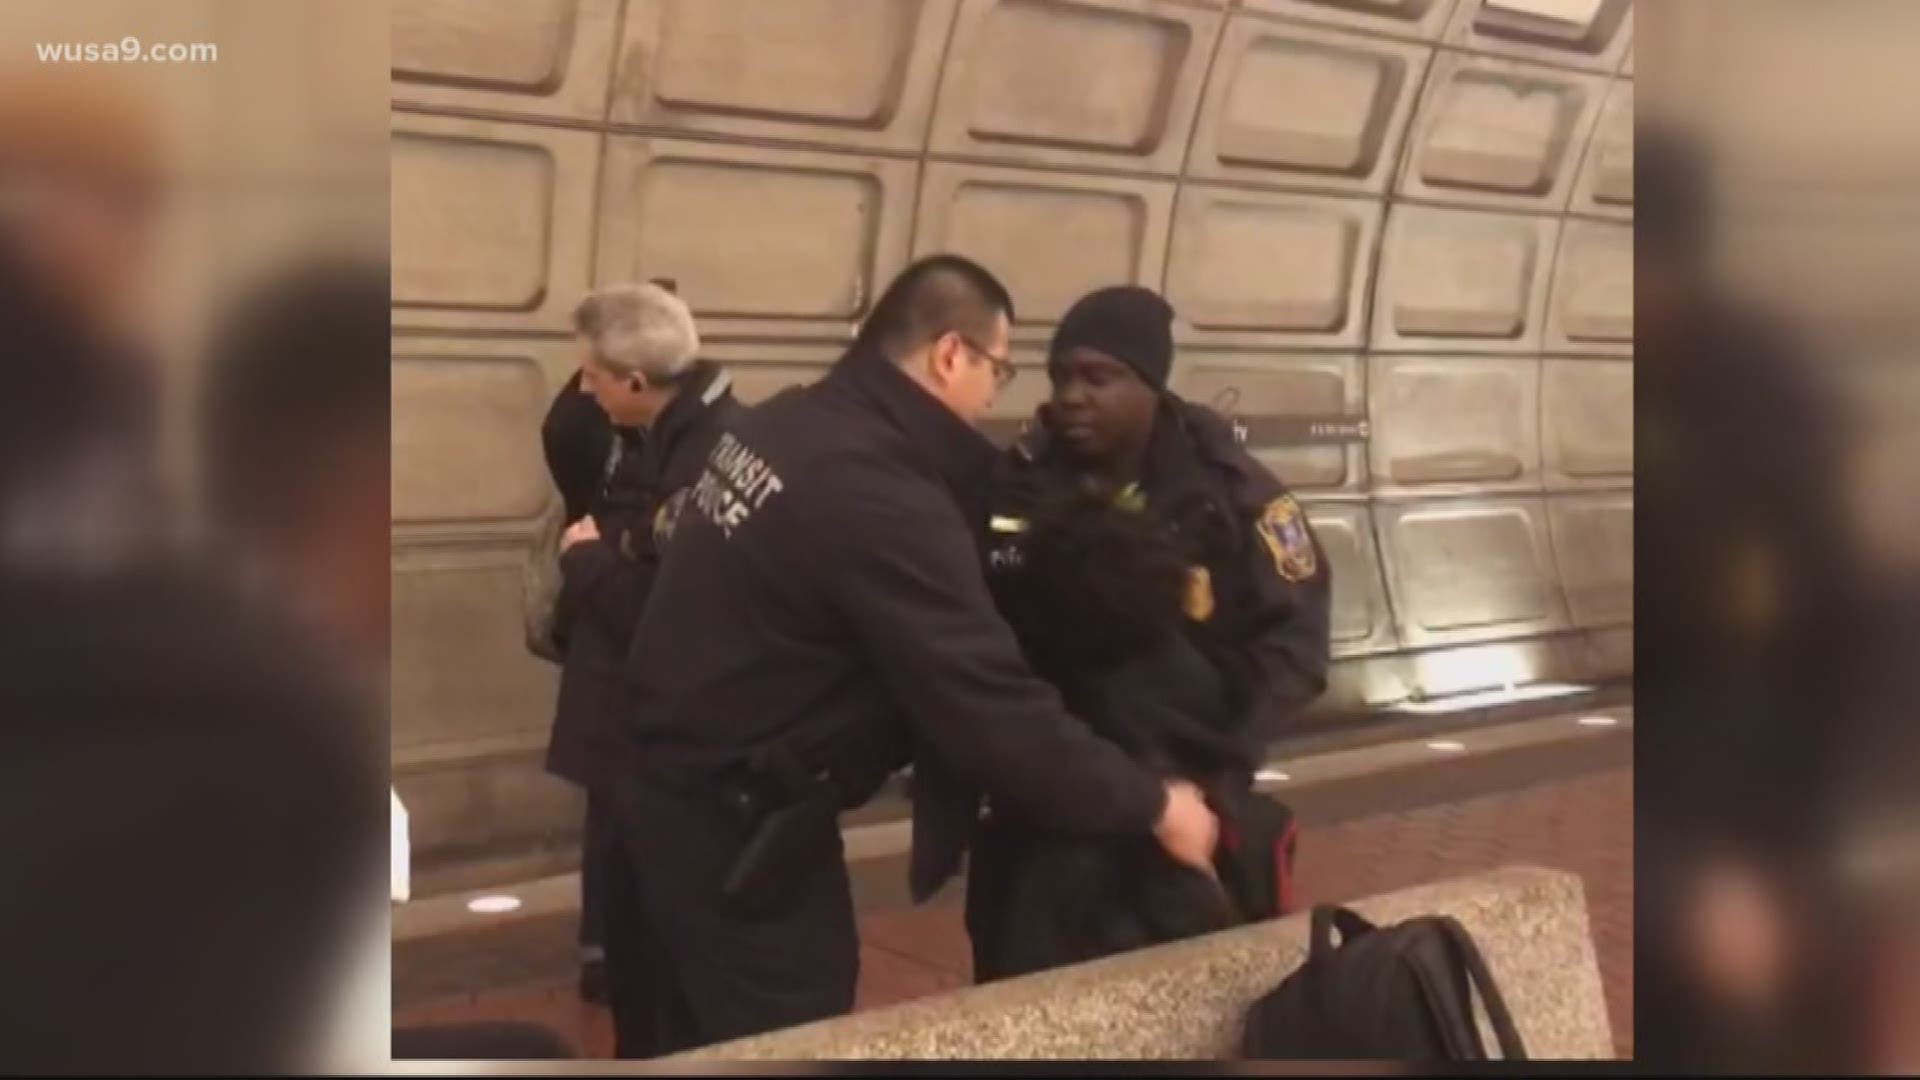 WMATA confirmed that officers did arrest the teen Thursday night around 9:30 p.m. at the Shaw-Howard Metro Station.